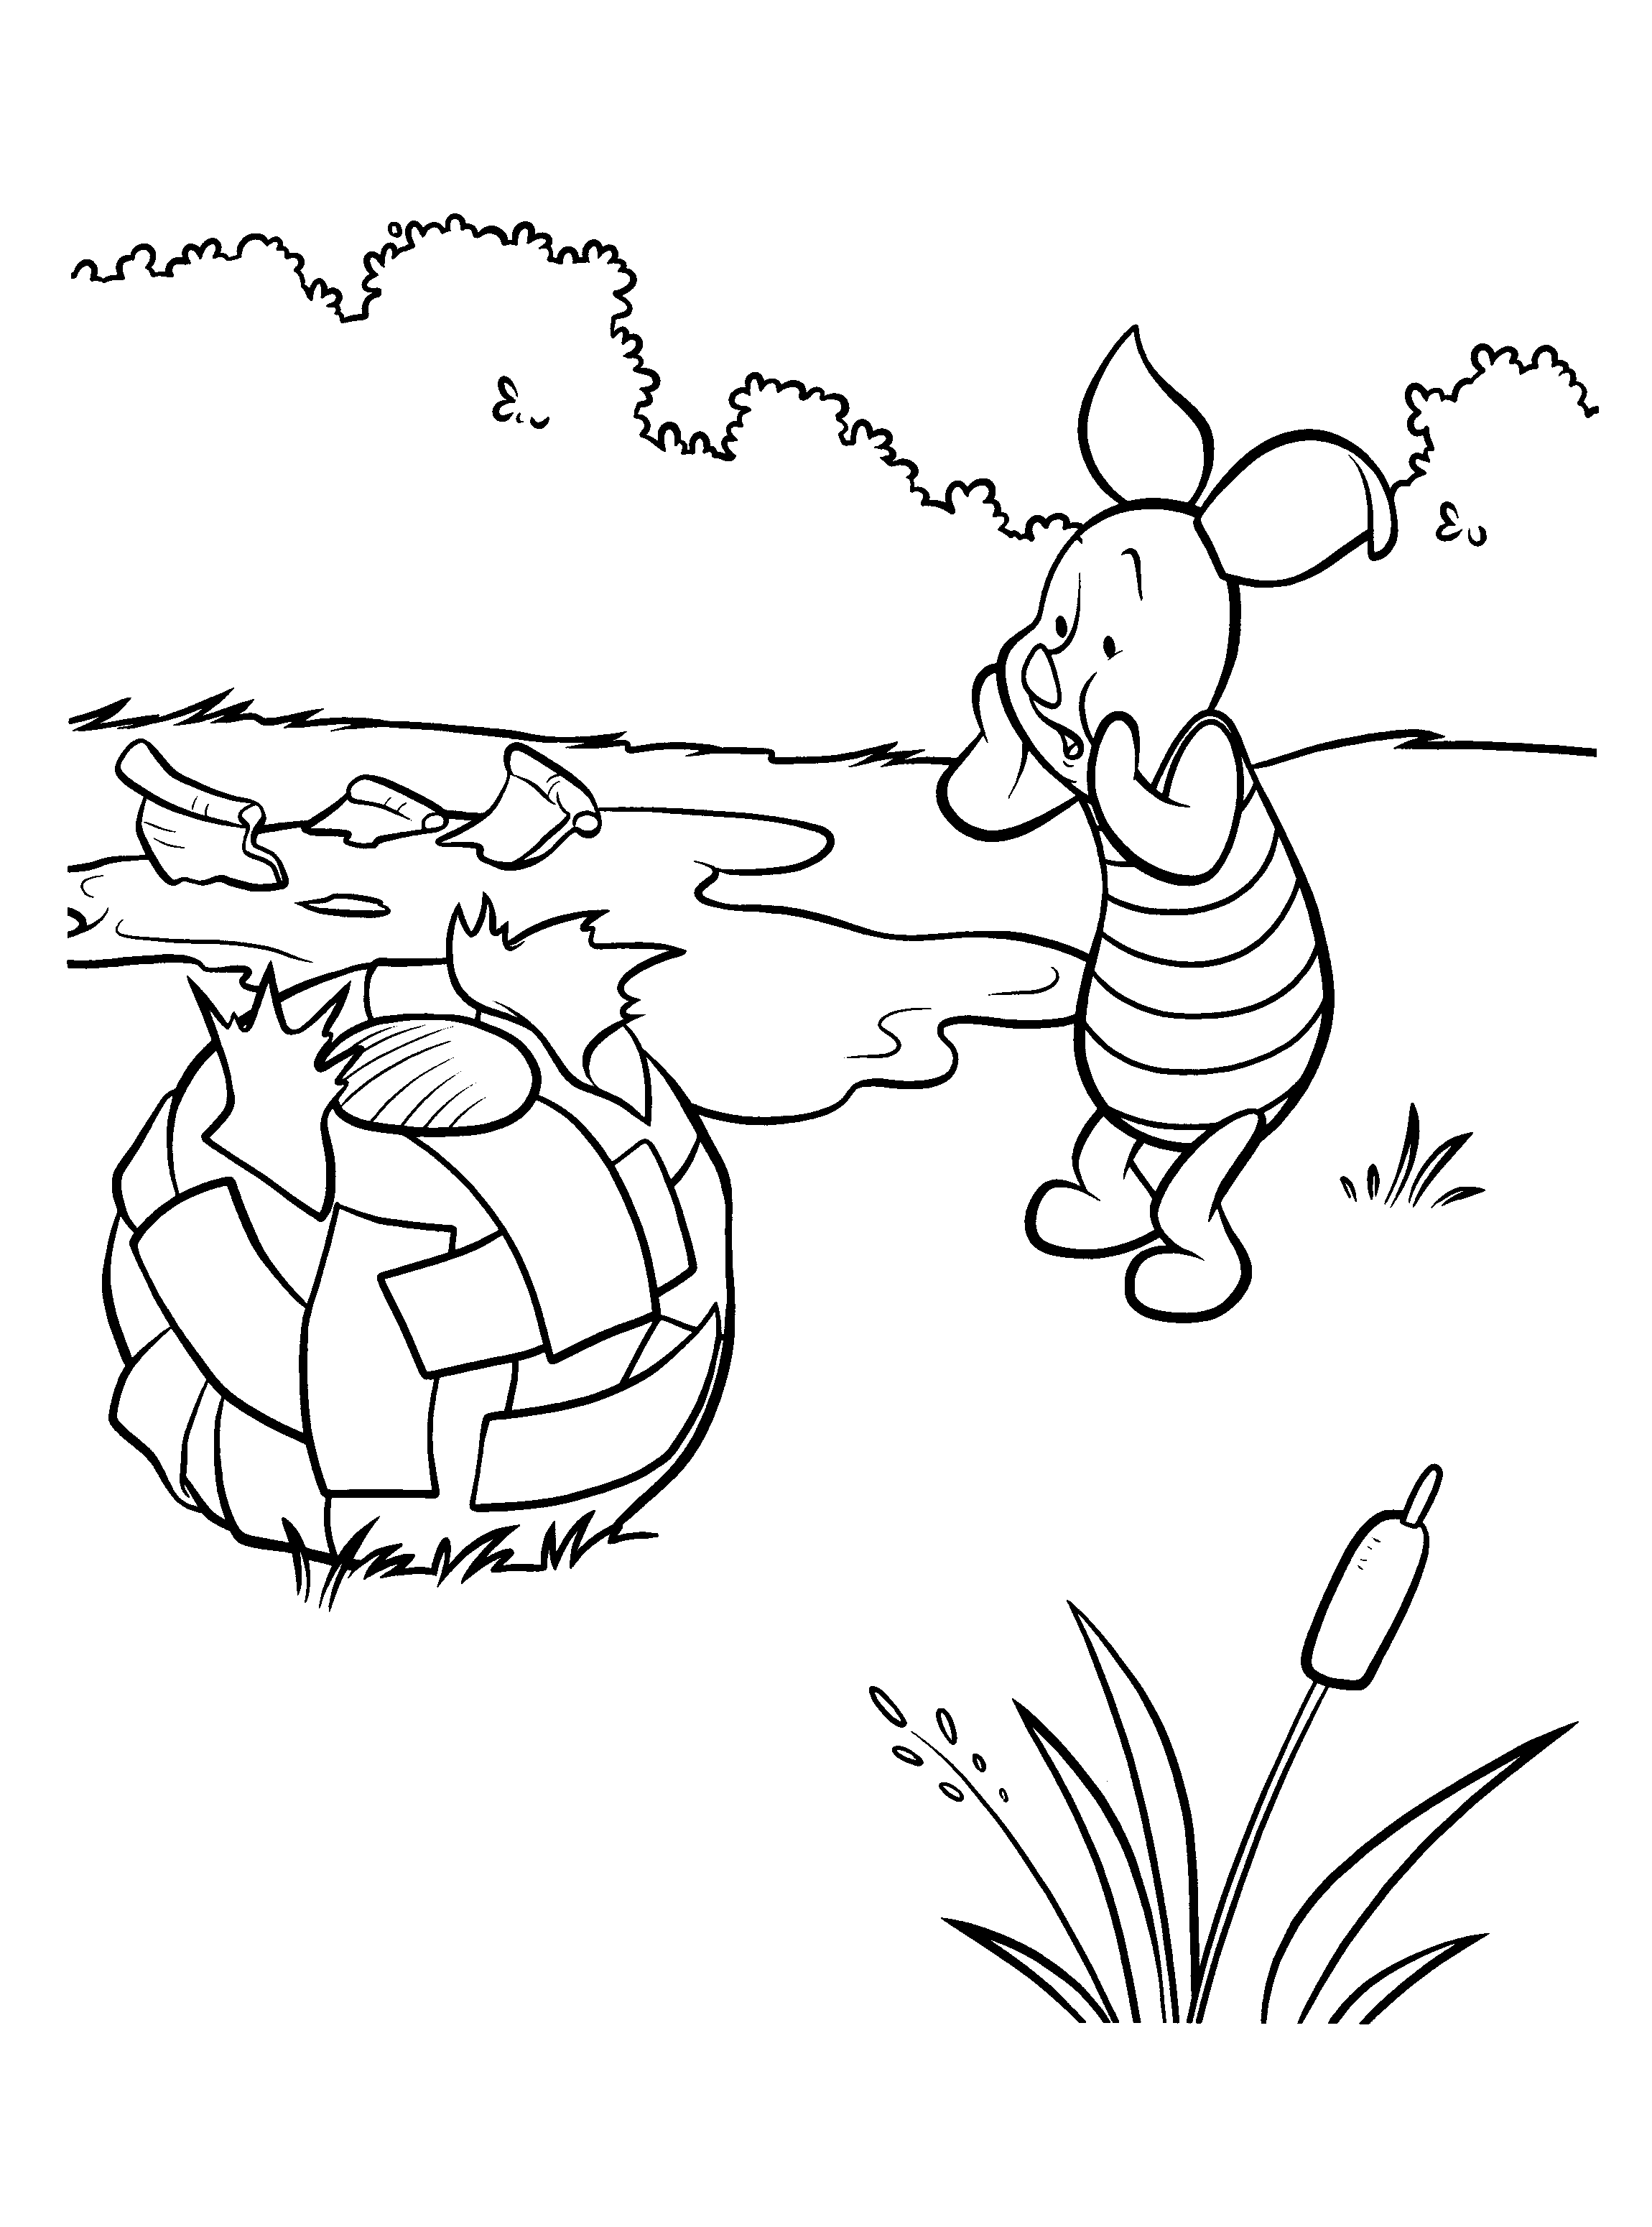 Coloring Pages Winnie the Pooh: Animated Images, Gifs, Pictures & Animations - 100% FREE!2300 x 3100